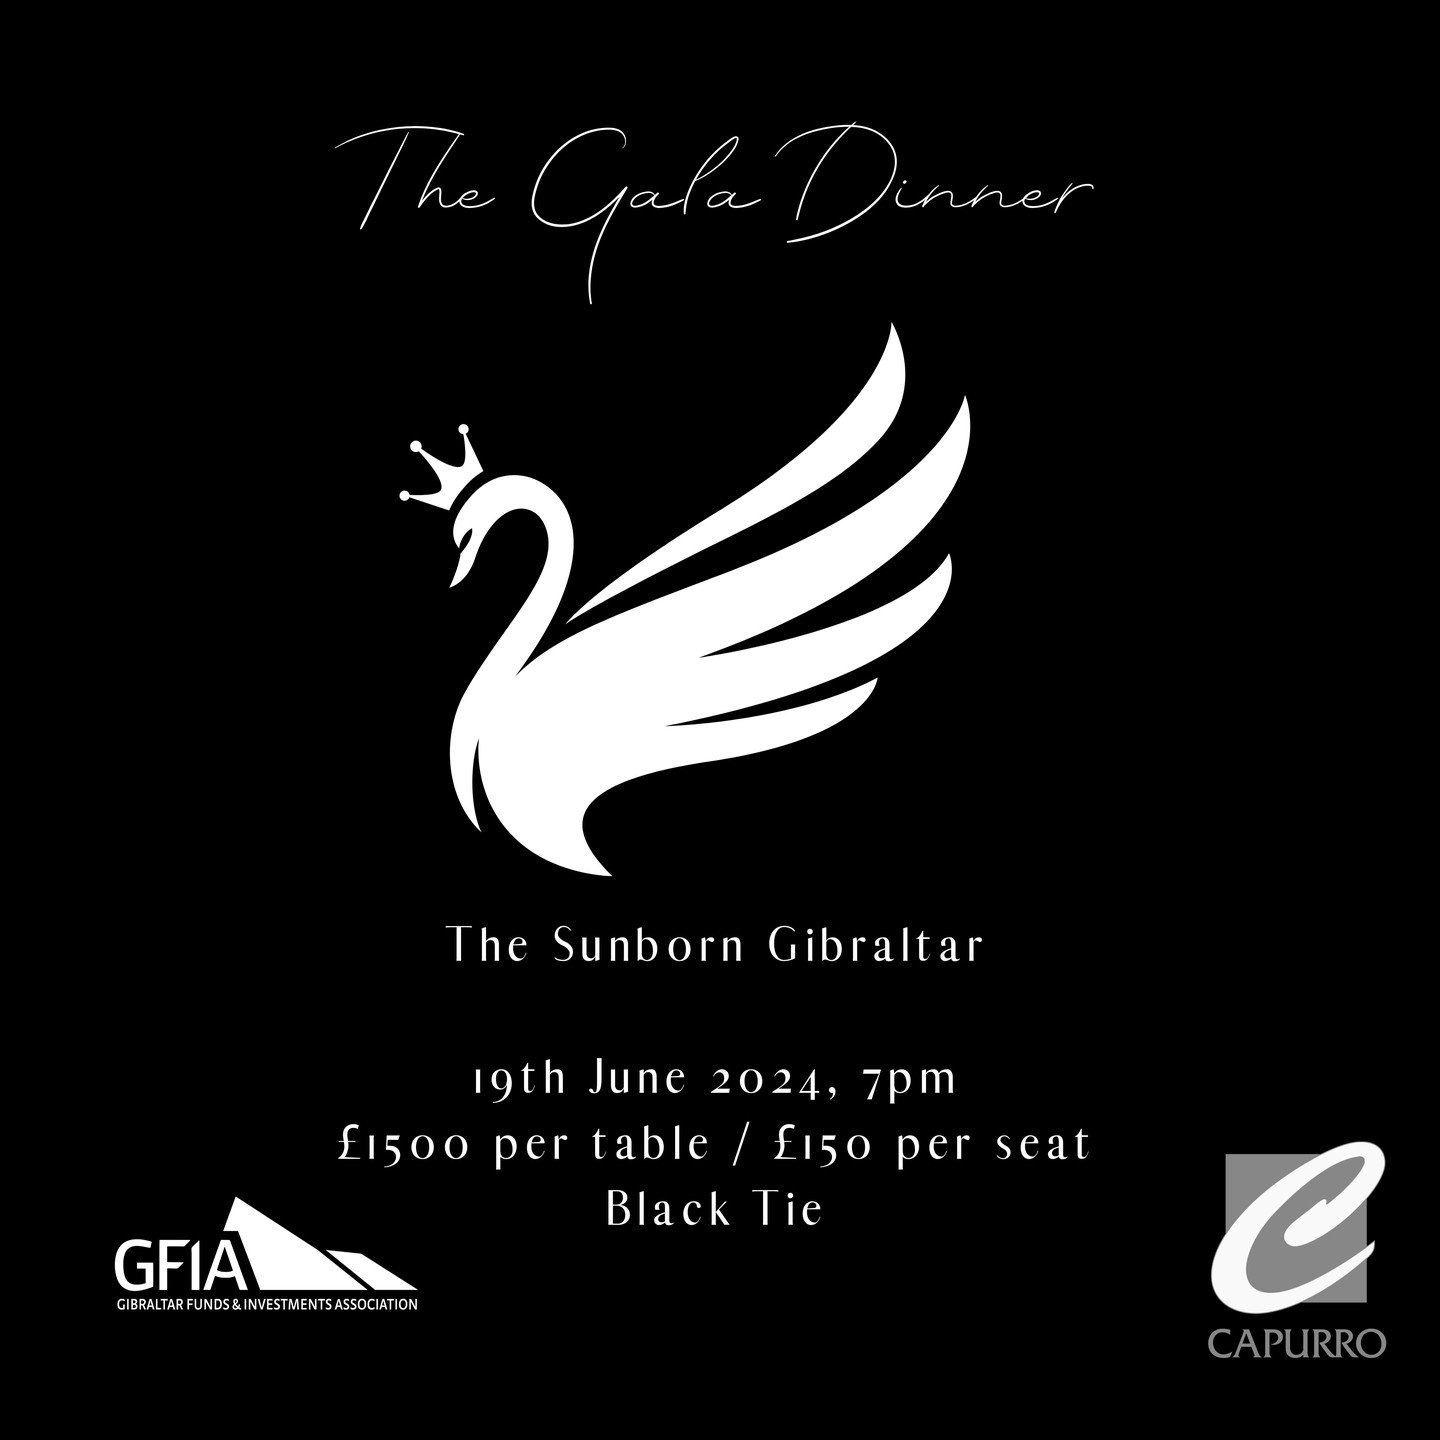 Reserve your table to this years GFIA Gala Dinner by emailing info@gfia.gi. 

 @a.m.capurro #swanlake #gala #gibraltar